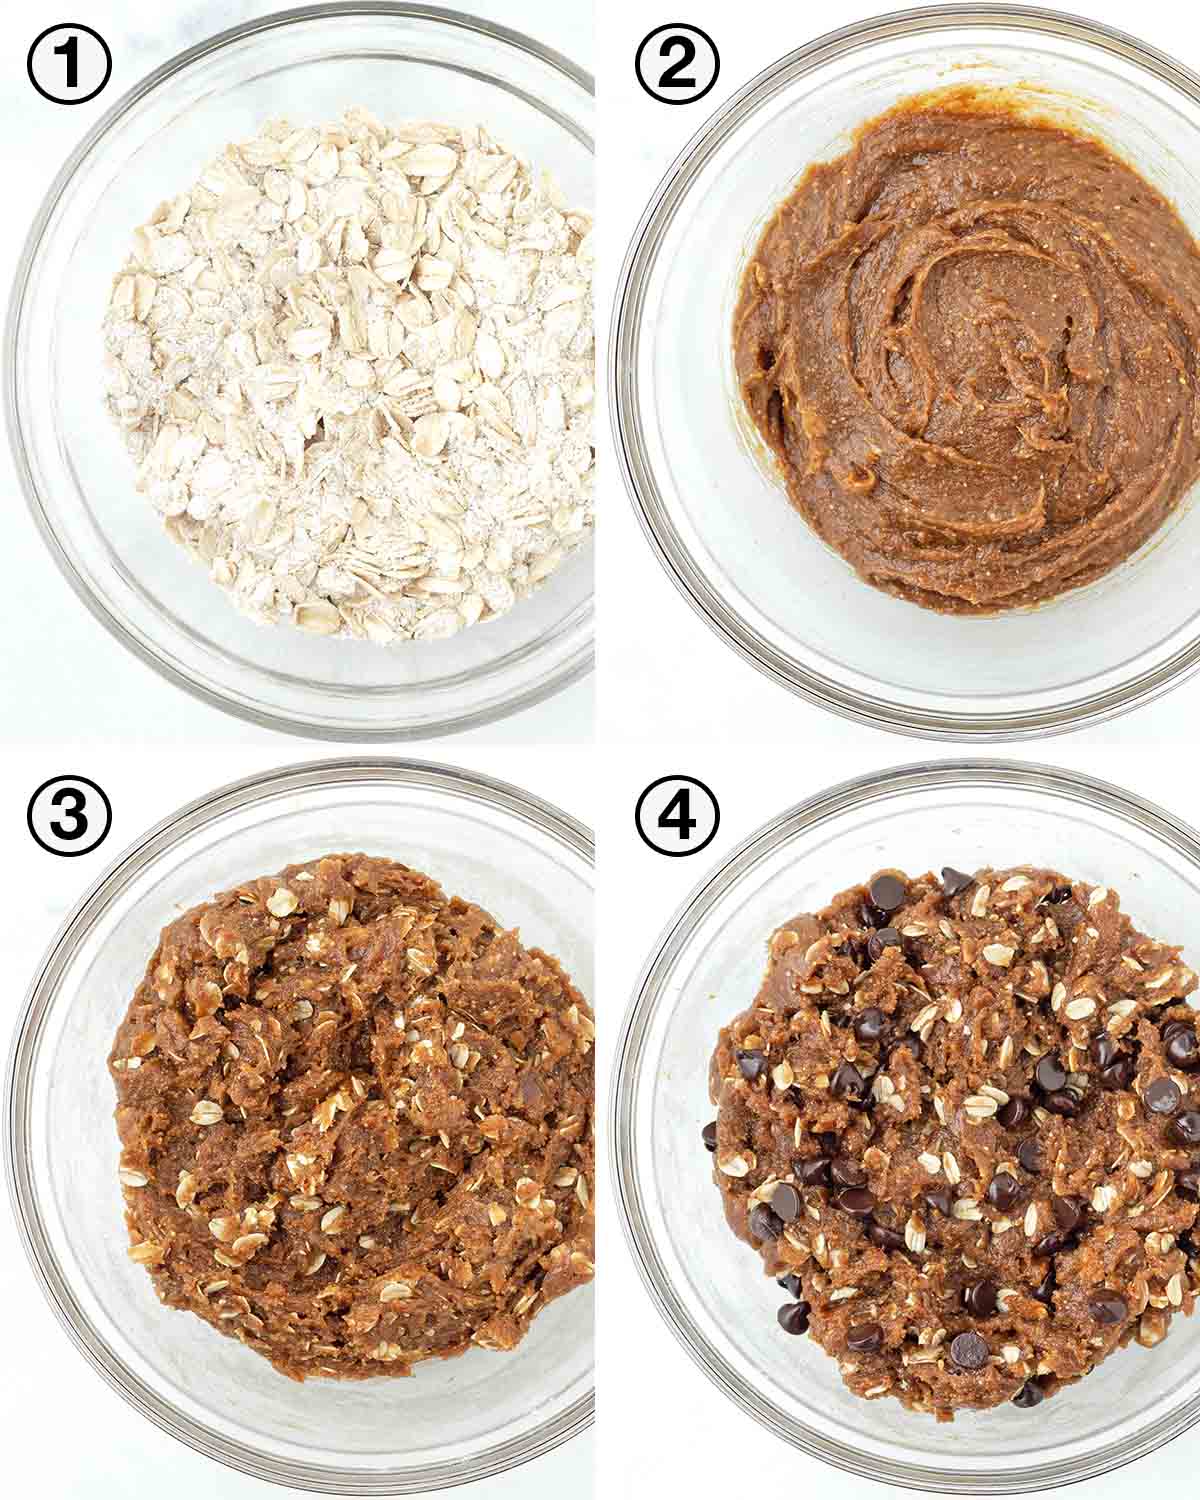 A collage of four images showing the first sequence of steps needed to make oatmeal peanut butter cookies.